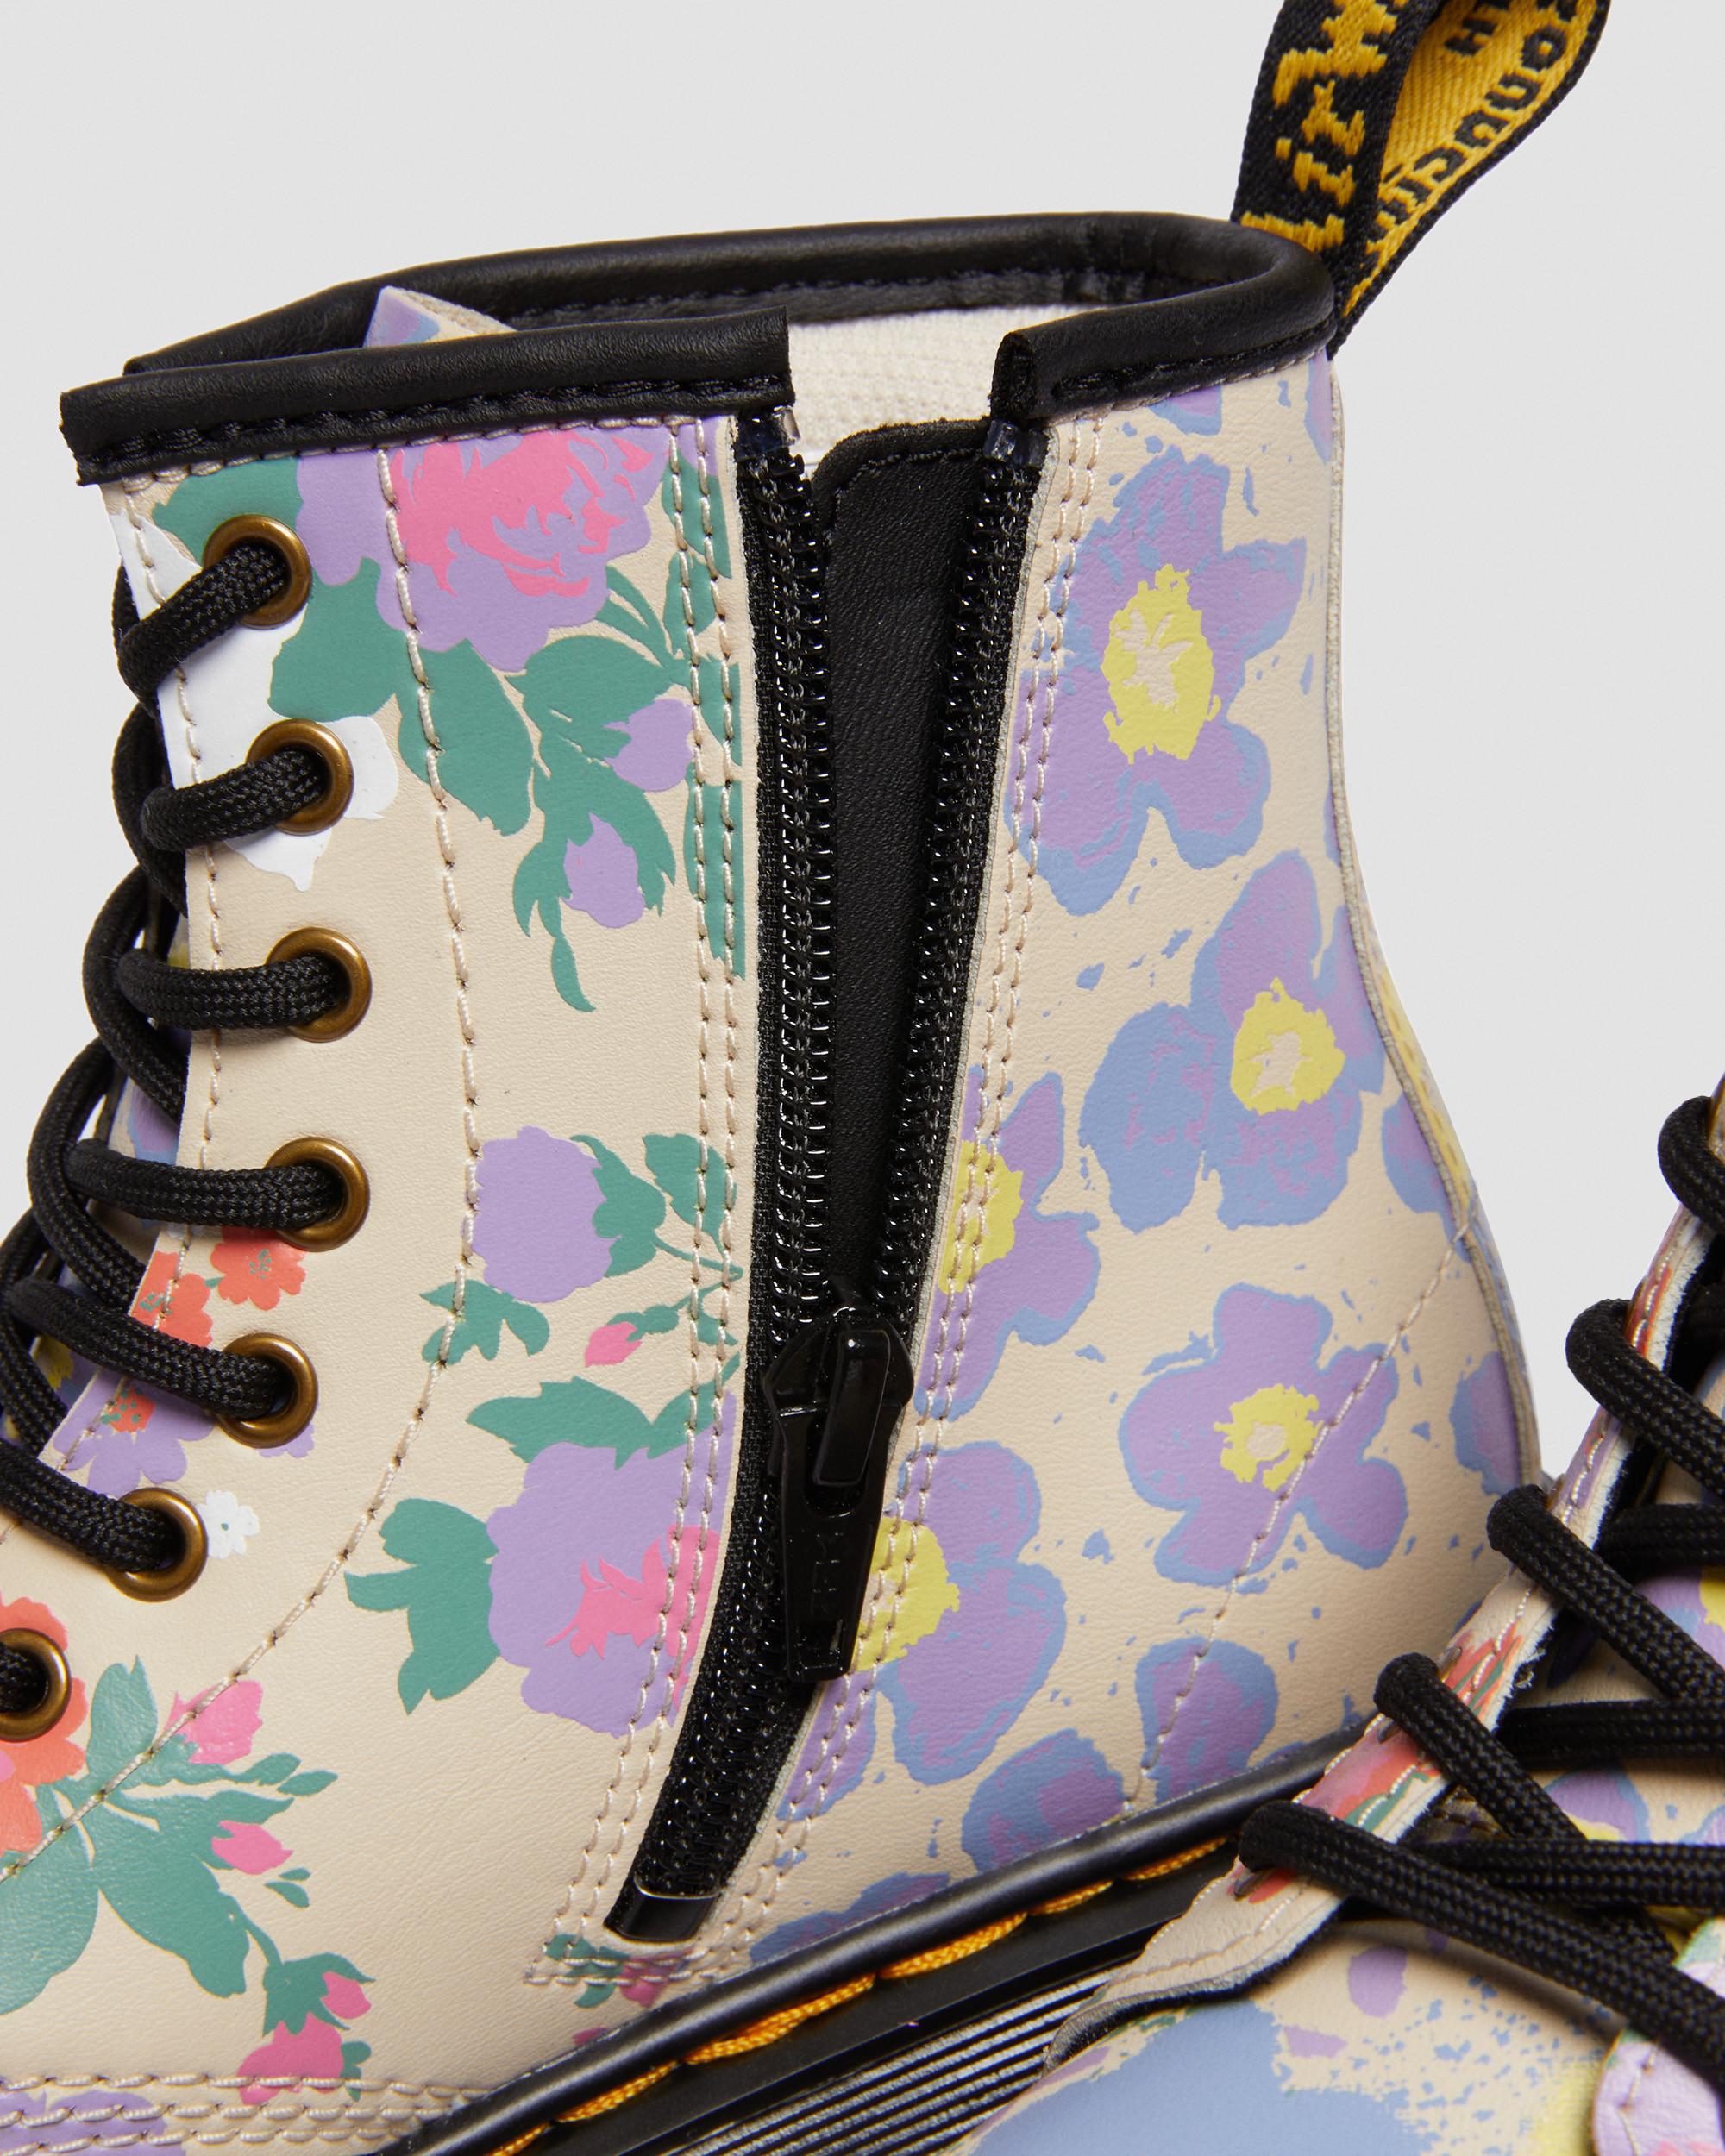 Junior 1460 Floral Mash Up Hydro Leather Lace Up BootsJunior 1460 Floral Mash Up Hydro Leather Lace Up Boots Dr. Martens